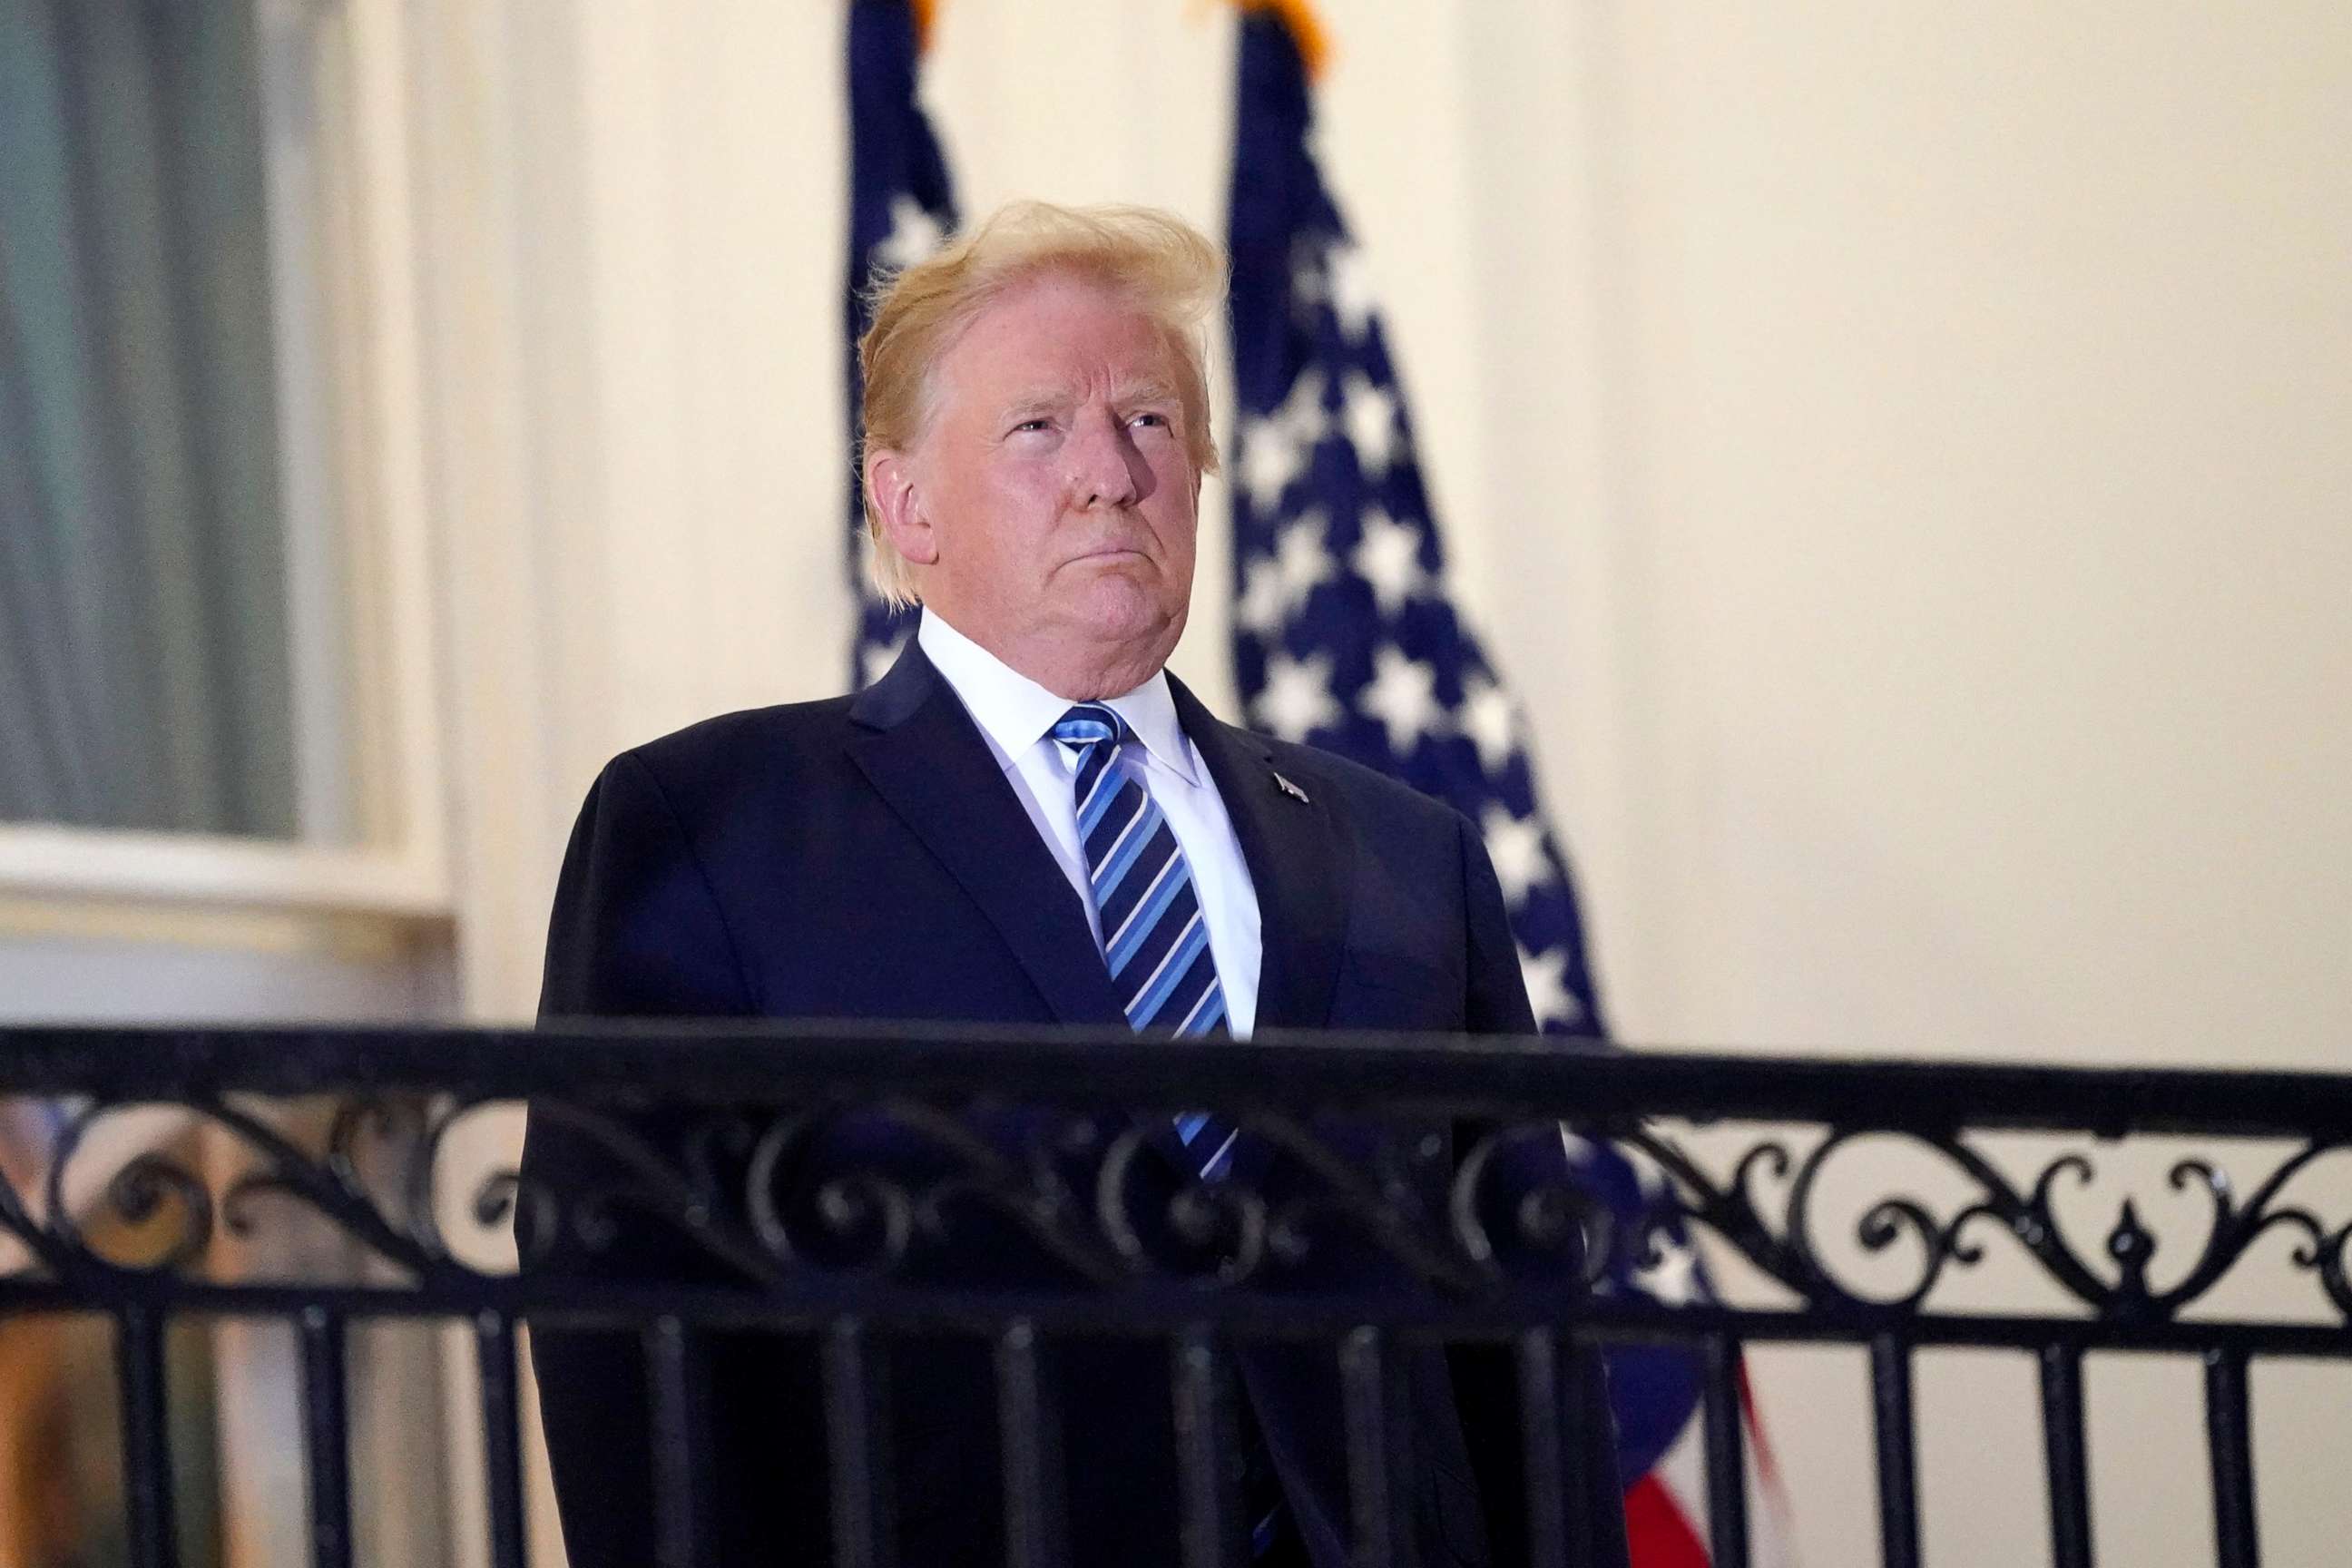 PHOTO: President Donald Trump stands on the balcony outside of the Blue Room as returns to the White House Monday, Oct. 5, 2020.